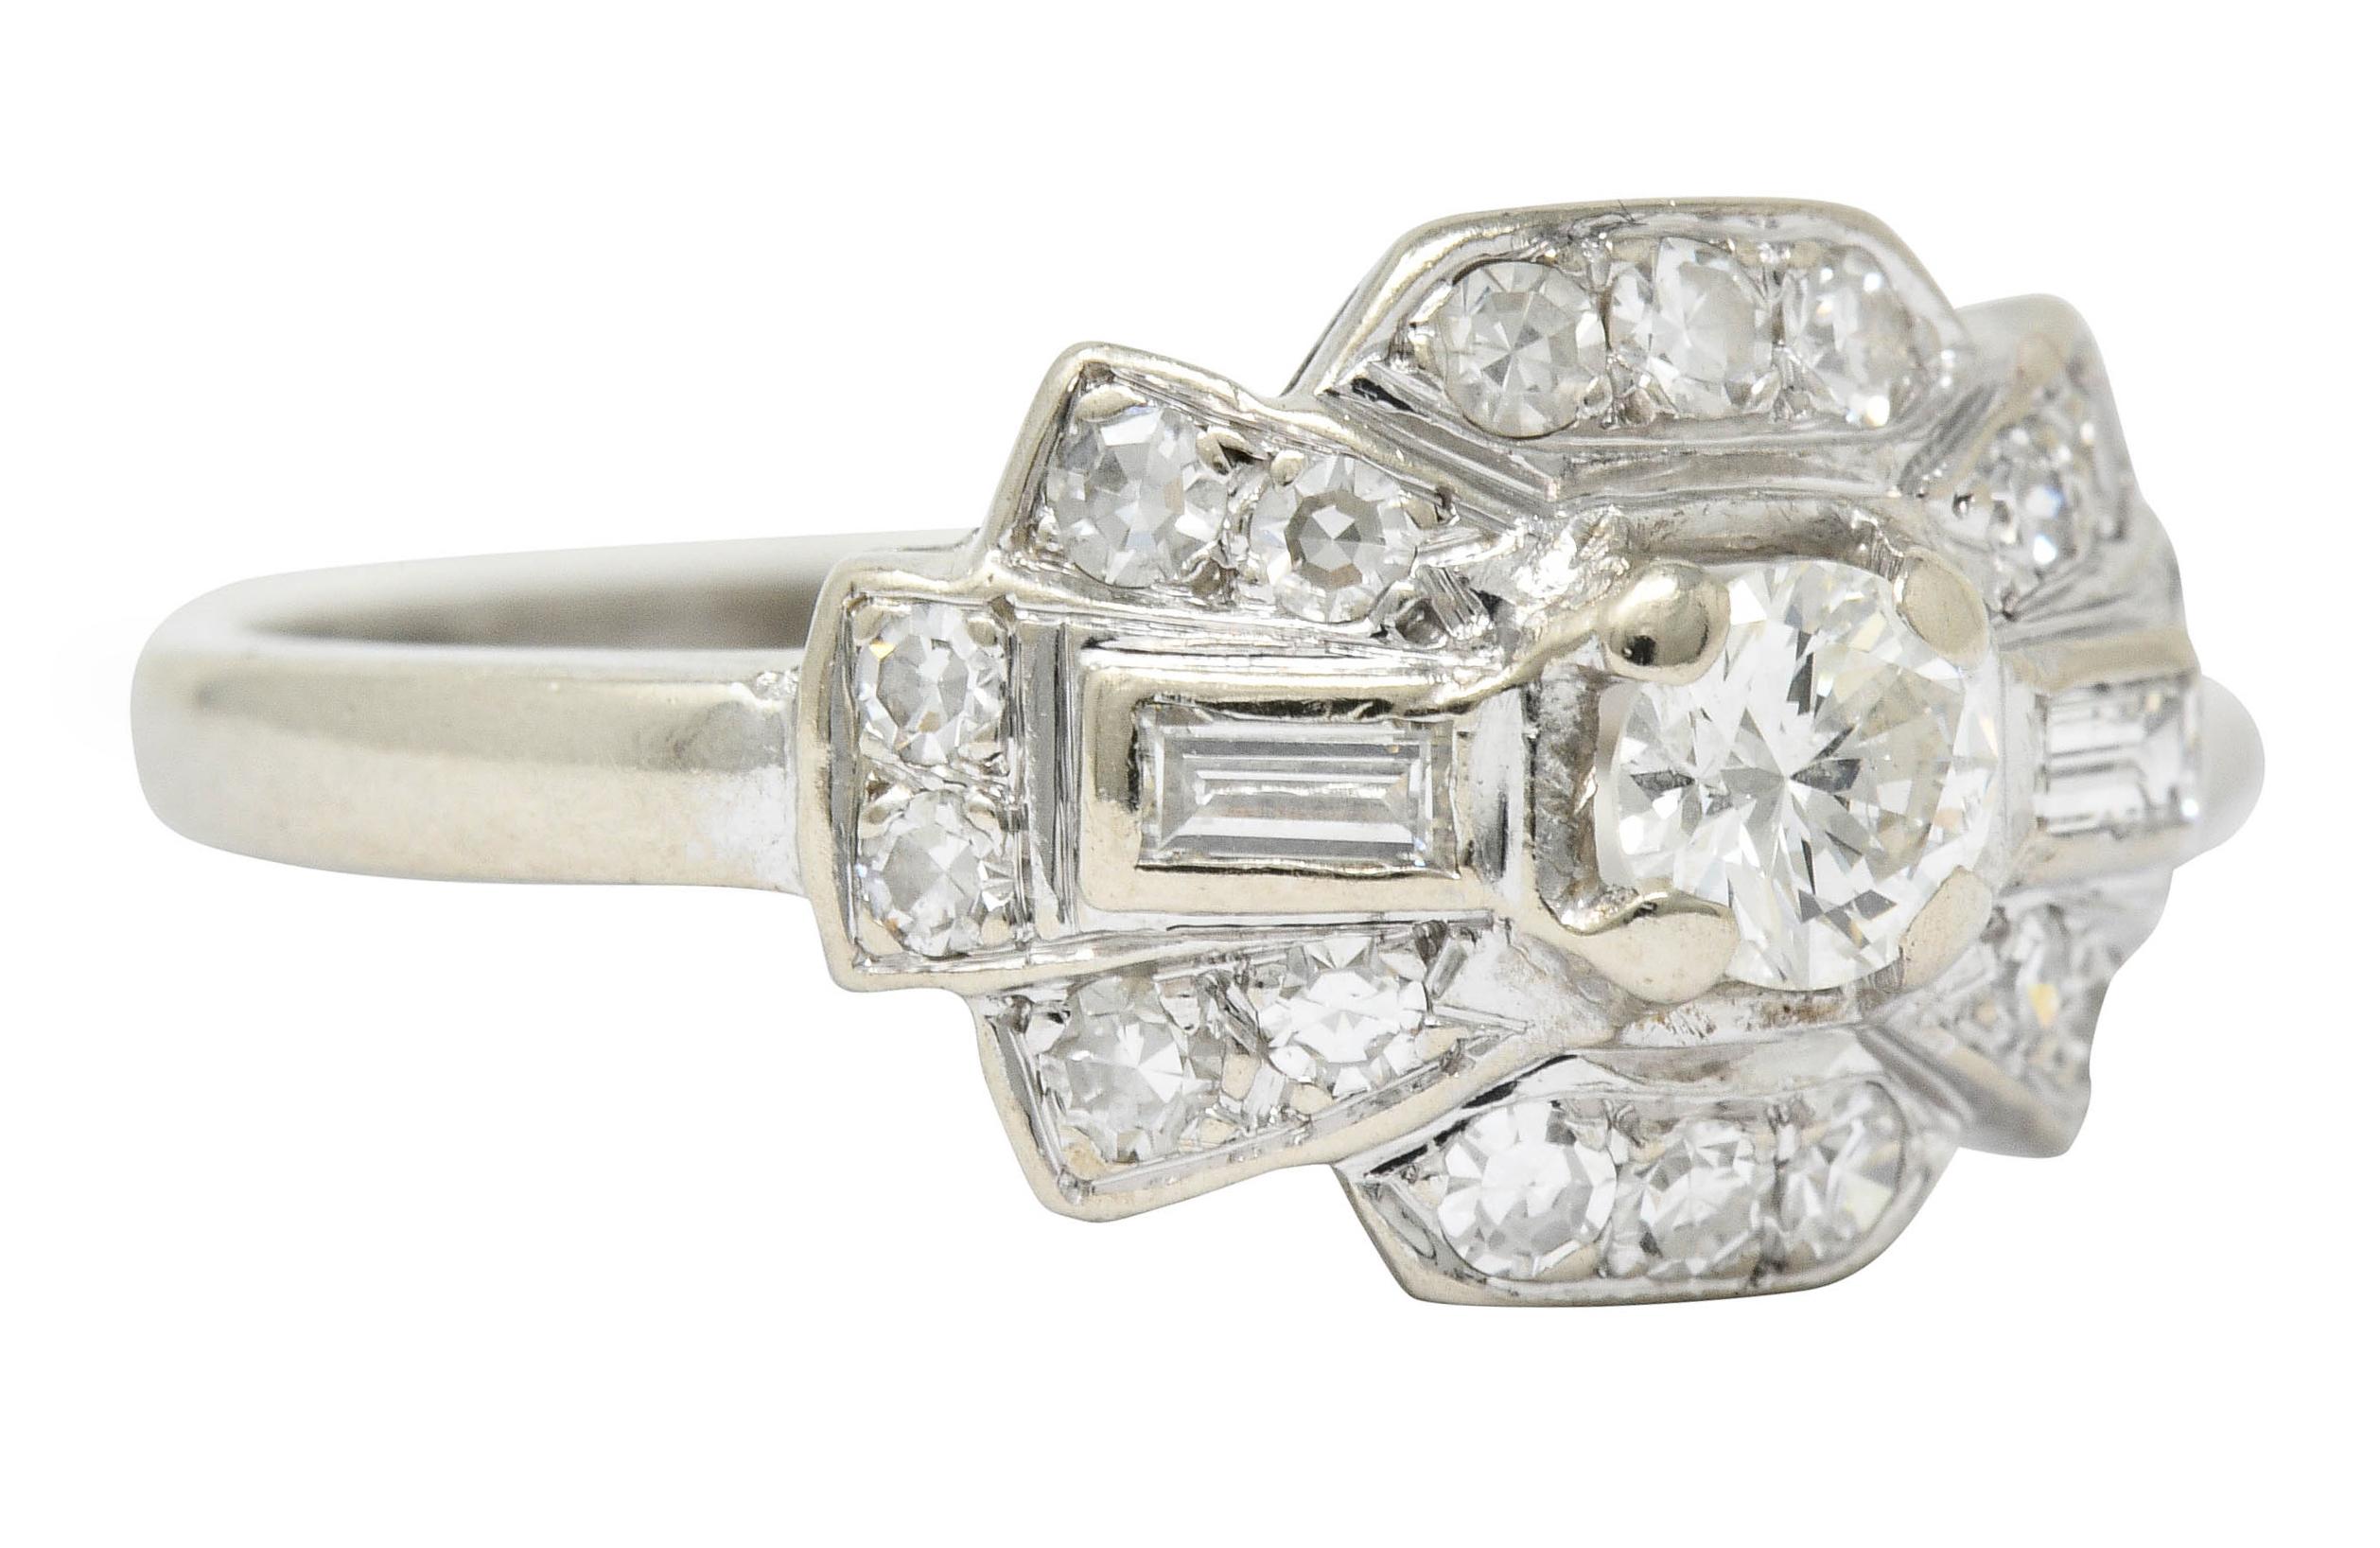 Band style ring designed as a stylized bow motif centering a round brilliant cut diamond weighing approximately 0.25 carat; J color and VS clarity

Flanked by two baguette cut diamonds weighing approximately 0.15 carat; eye-clean and